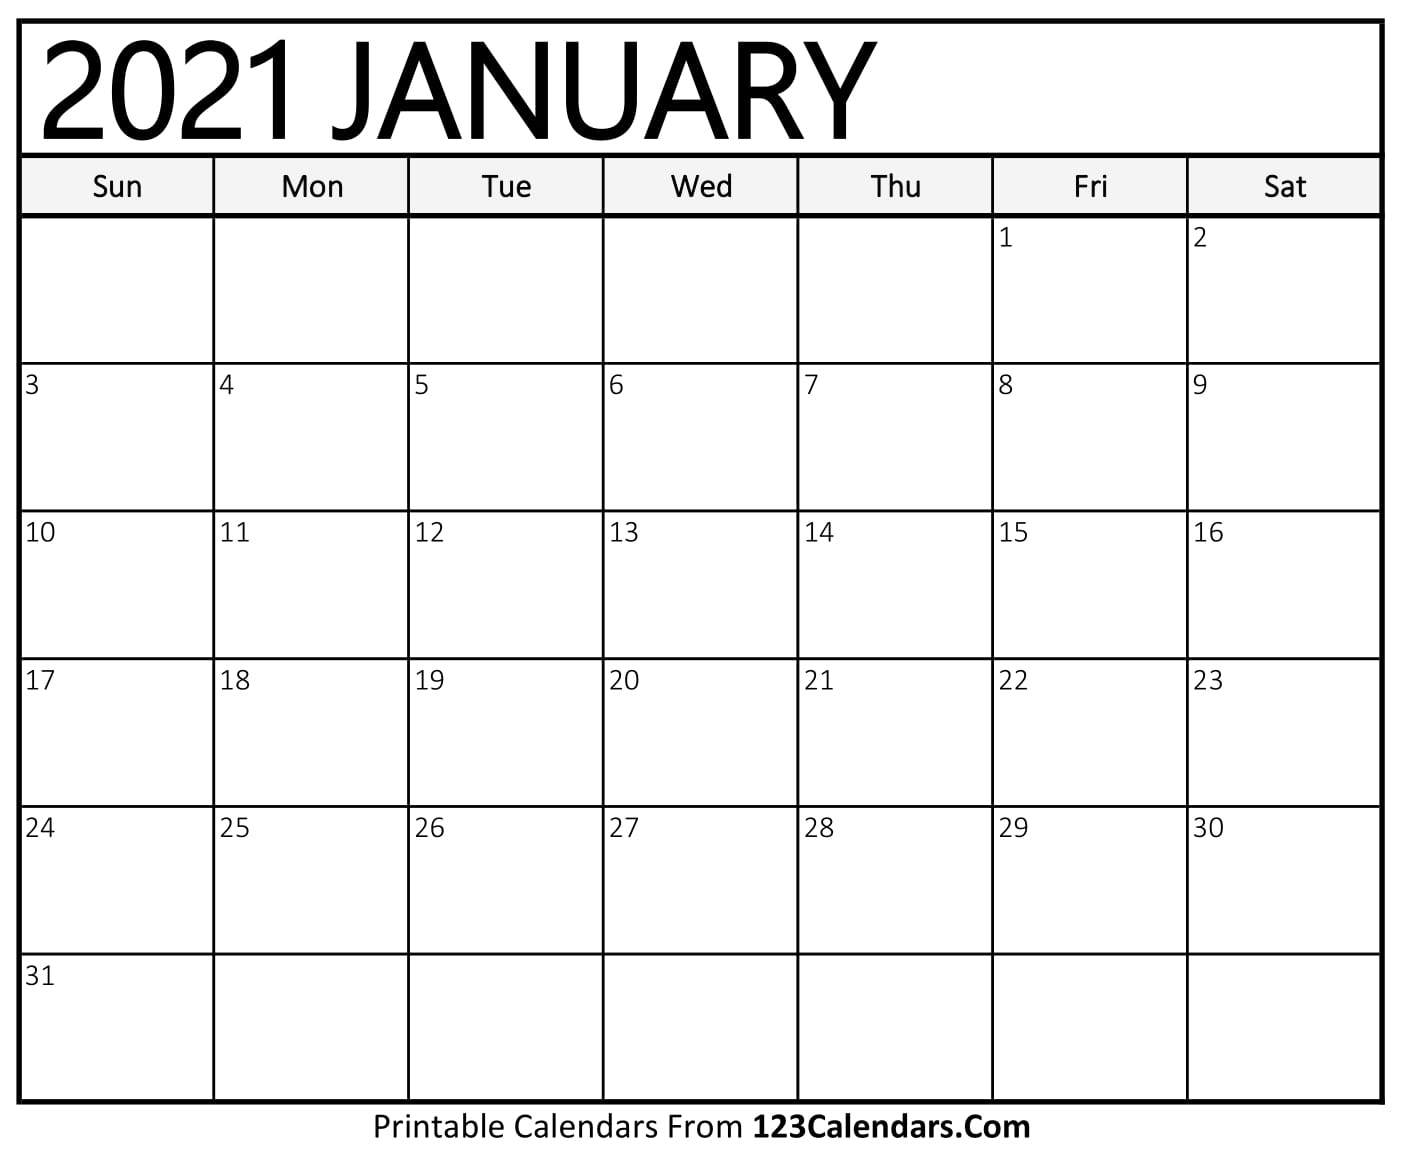 Get Printable Calendar 2021 I Can Type On